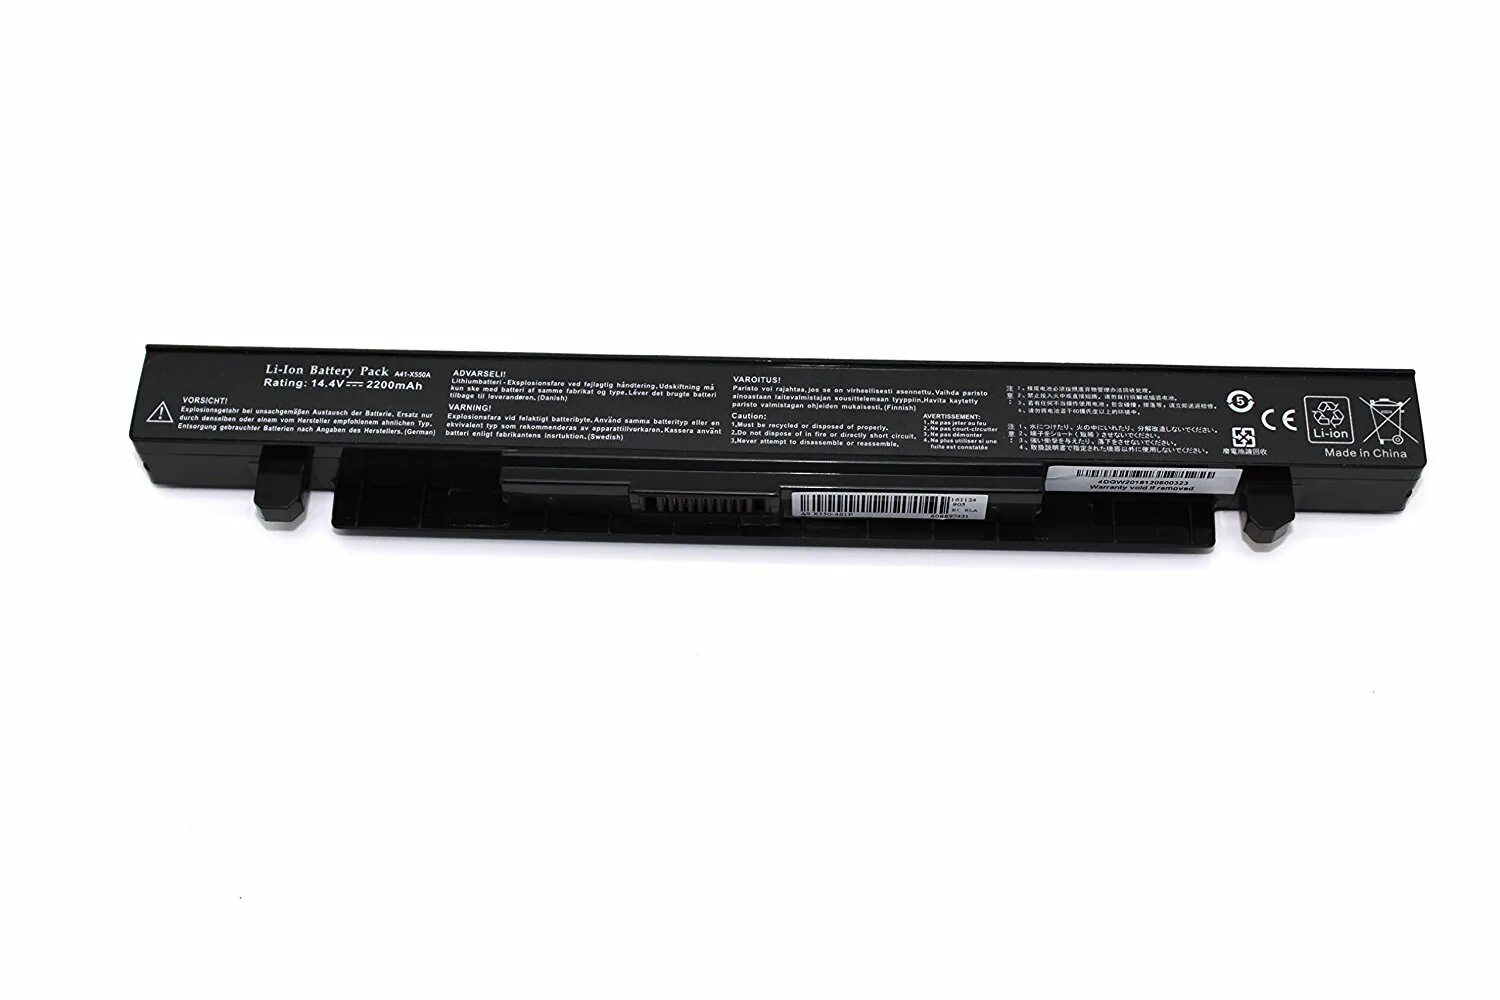 Lon battery. Батарея ASUS a41-x550a. ASUS Battery Pack a41-x550a. Li-ion Battery Pack a41-x550a. Ноутбук ASUS li-ion Battery Pack.